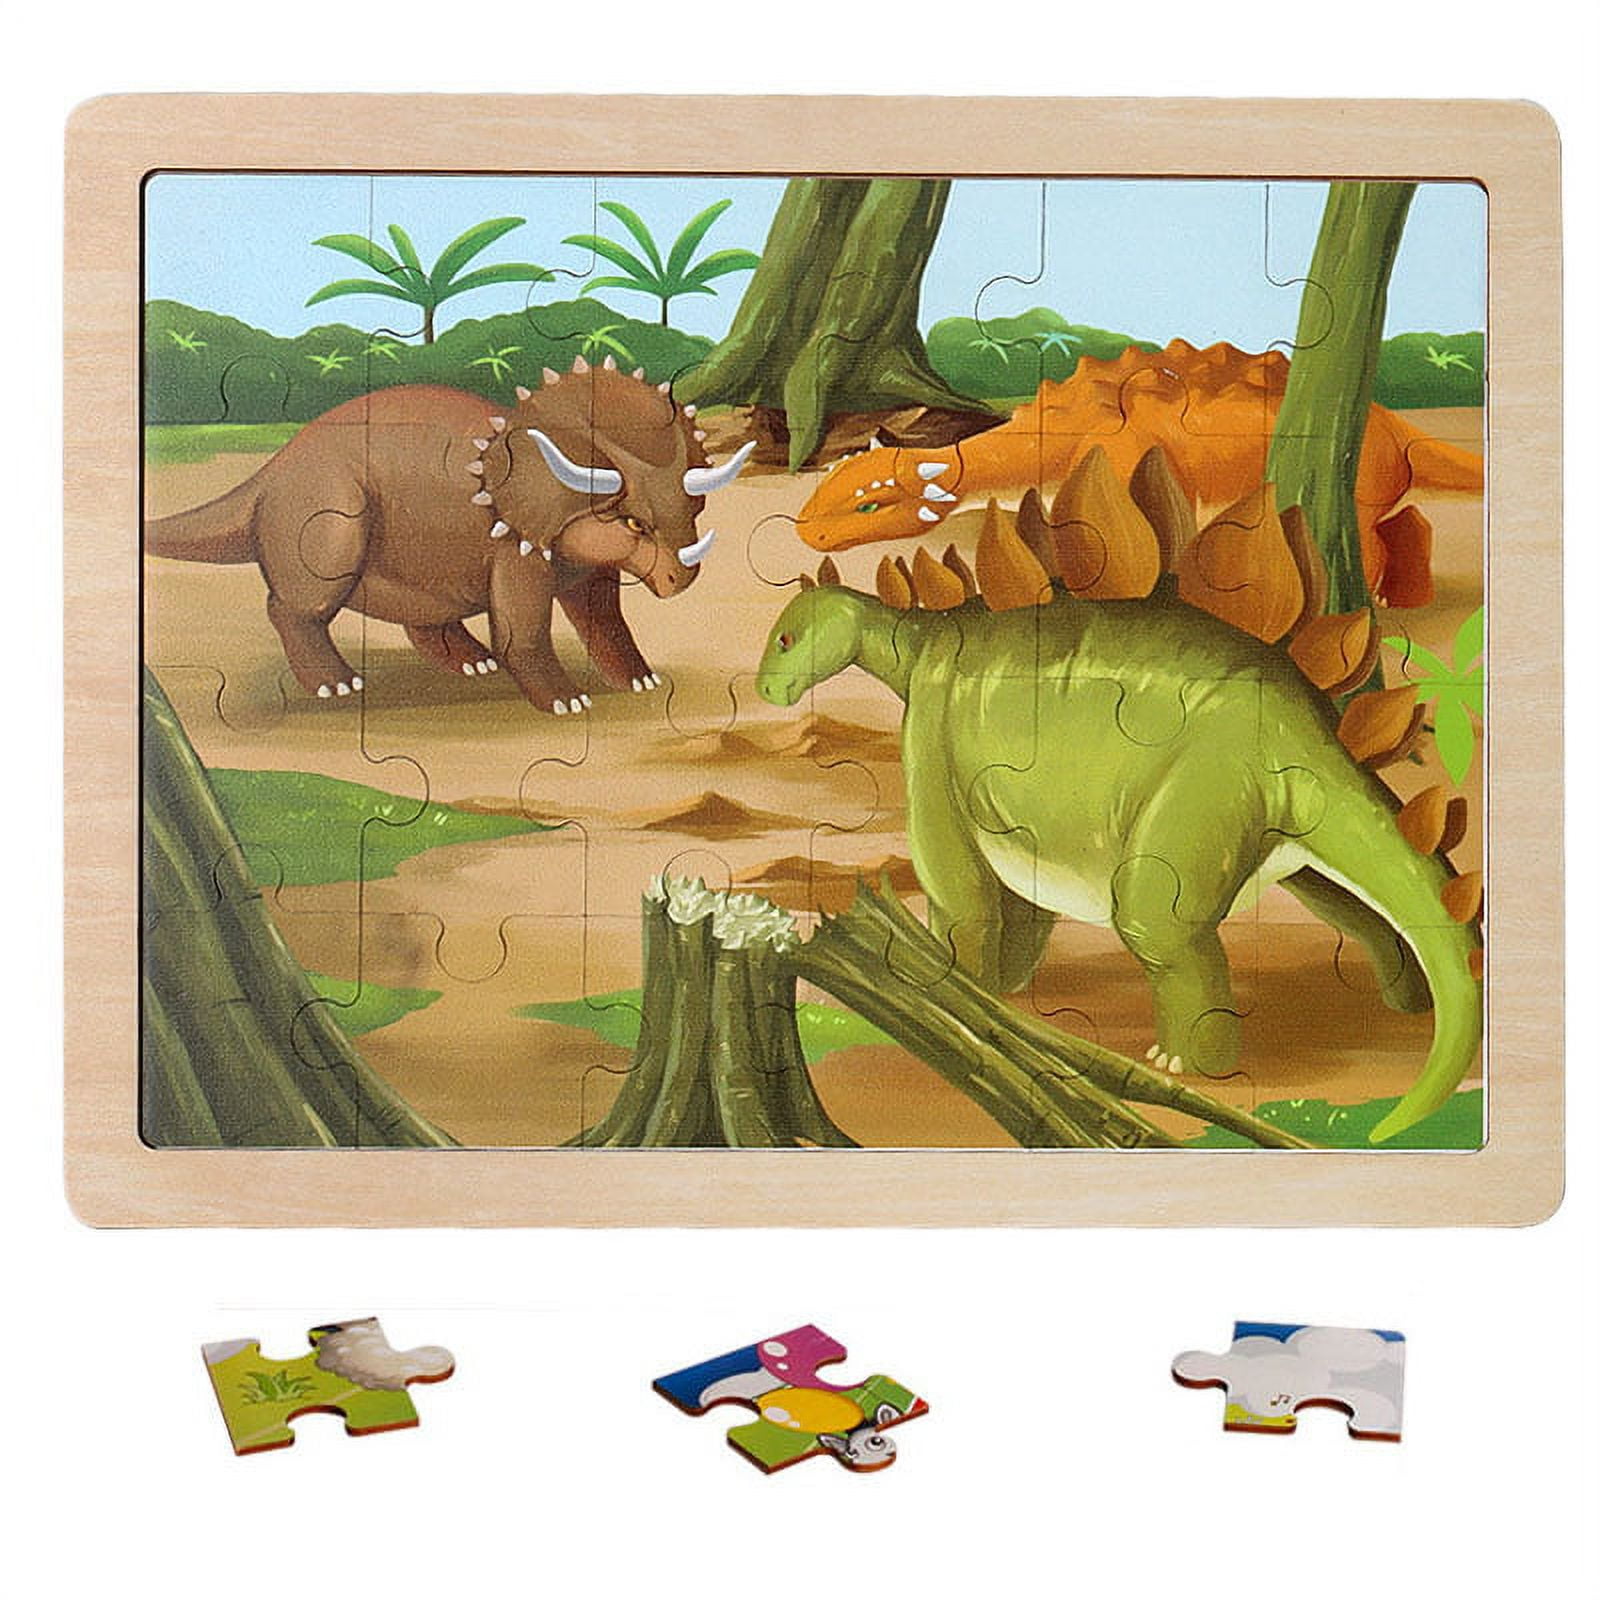 Fridja Dinosaur Wooden Pegged Puzzles for Toddlers Age 2-4 Years Old, Montessori Games and Educational Toys for Kids 2-4